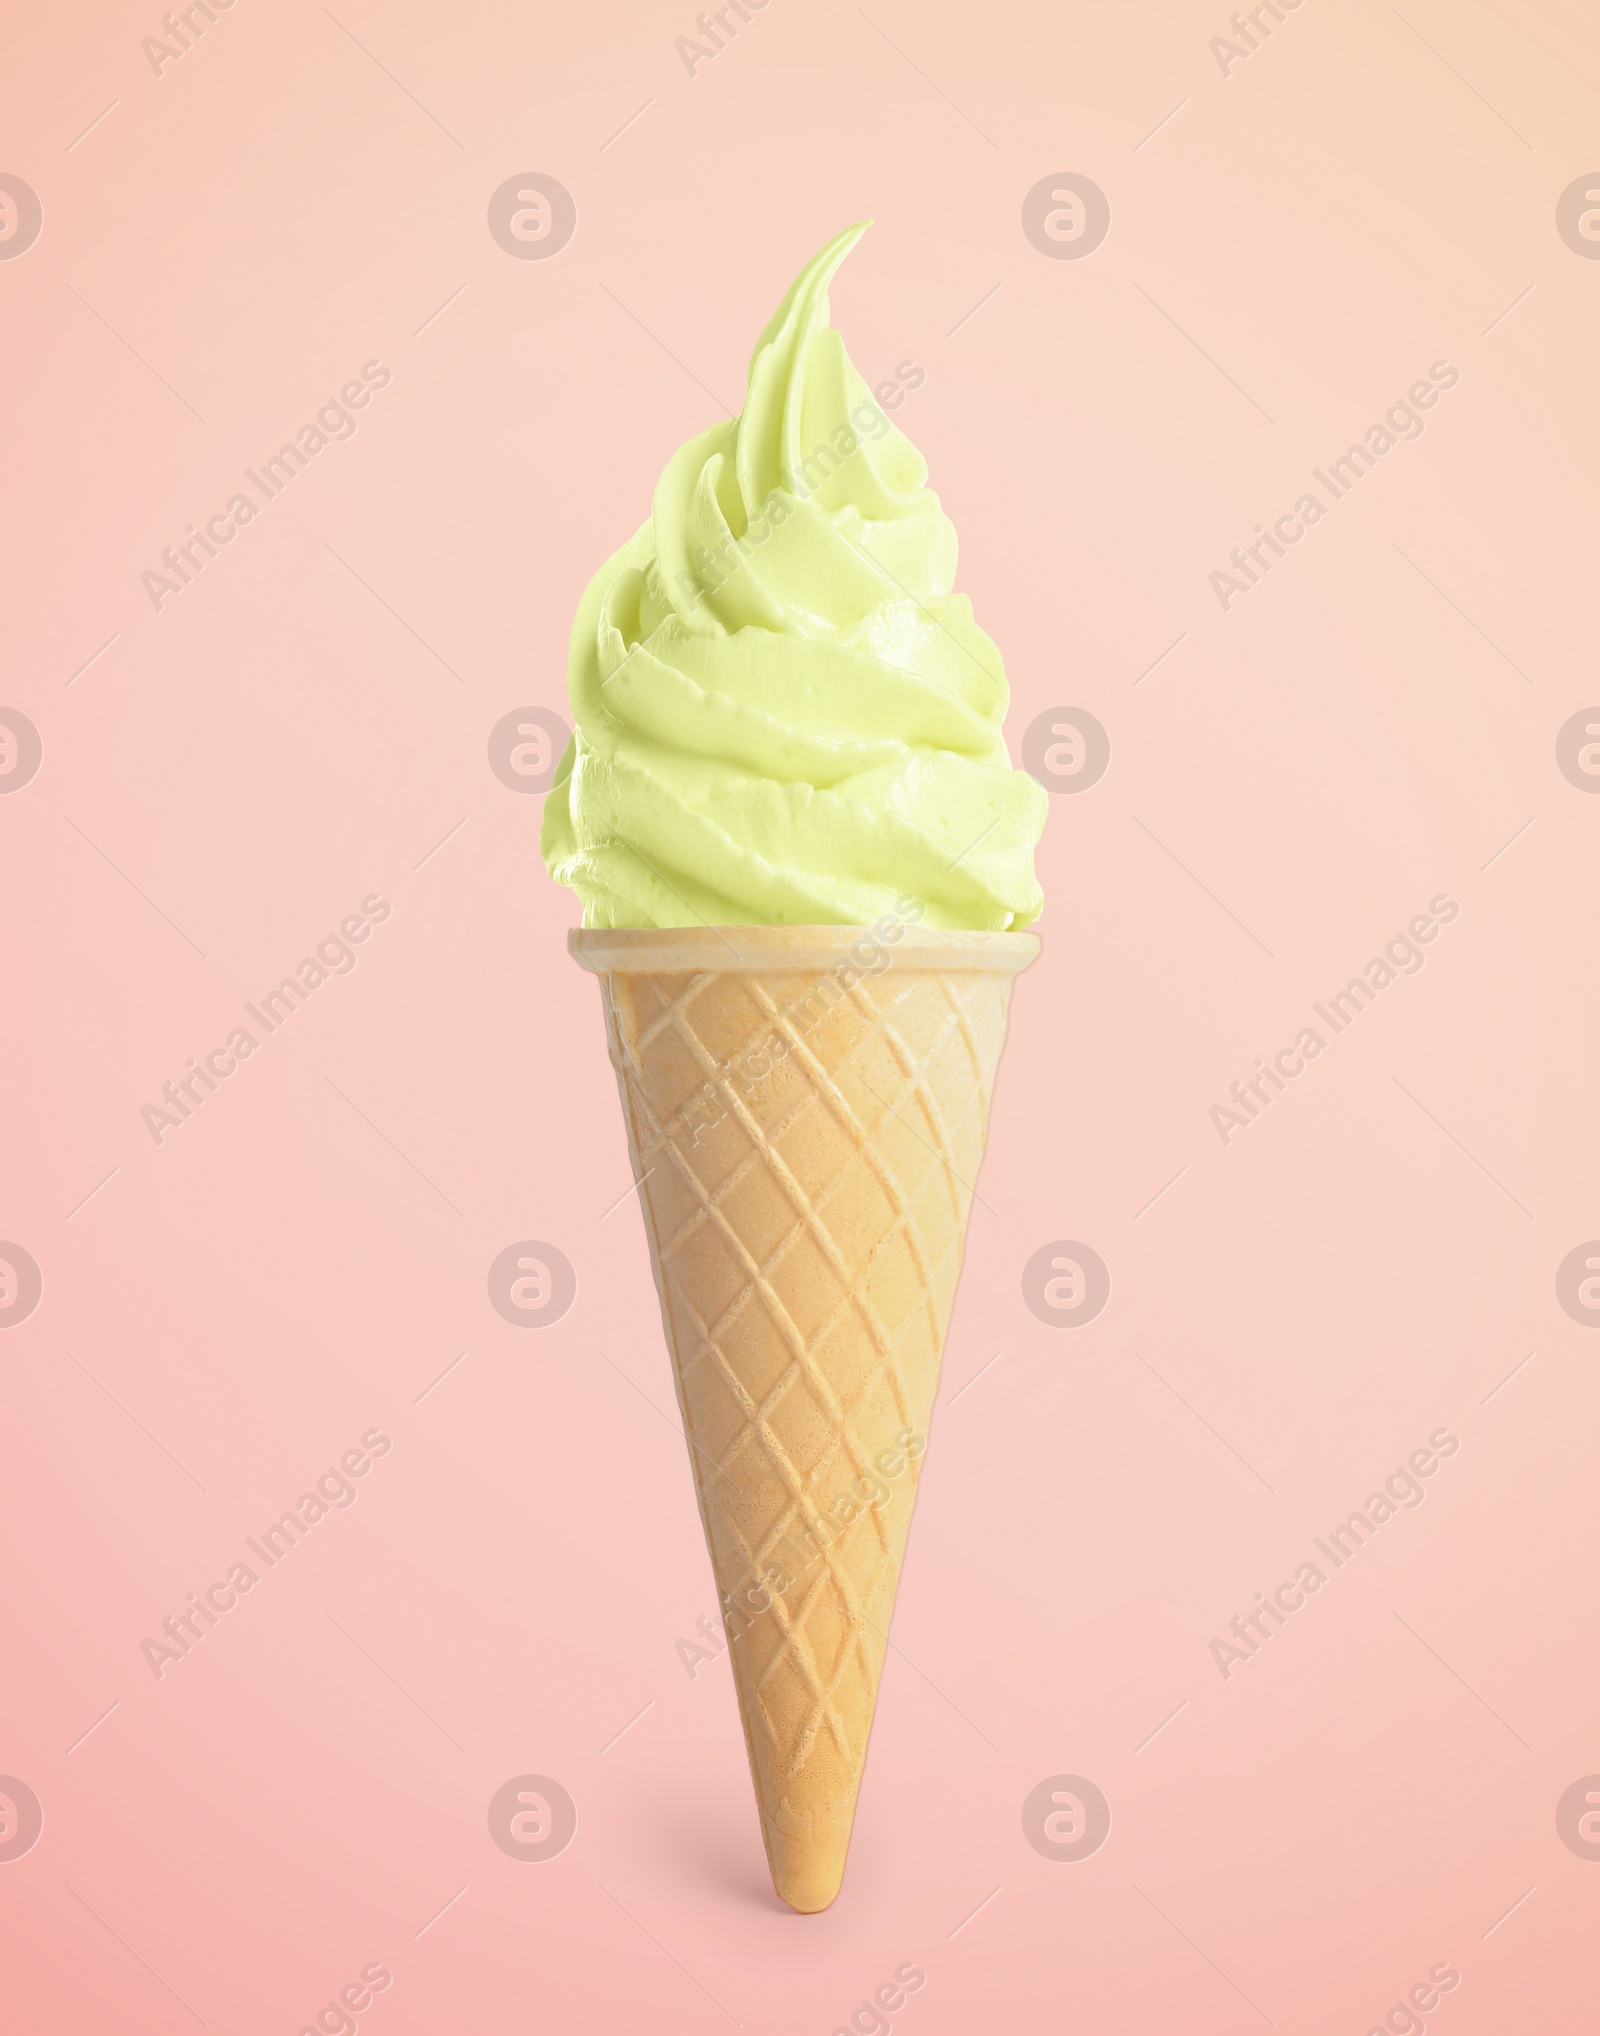 Image of Tasty ice cream in waffle cone on pastel pink background. Soft serve